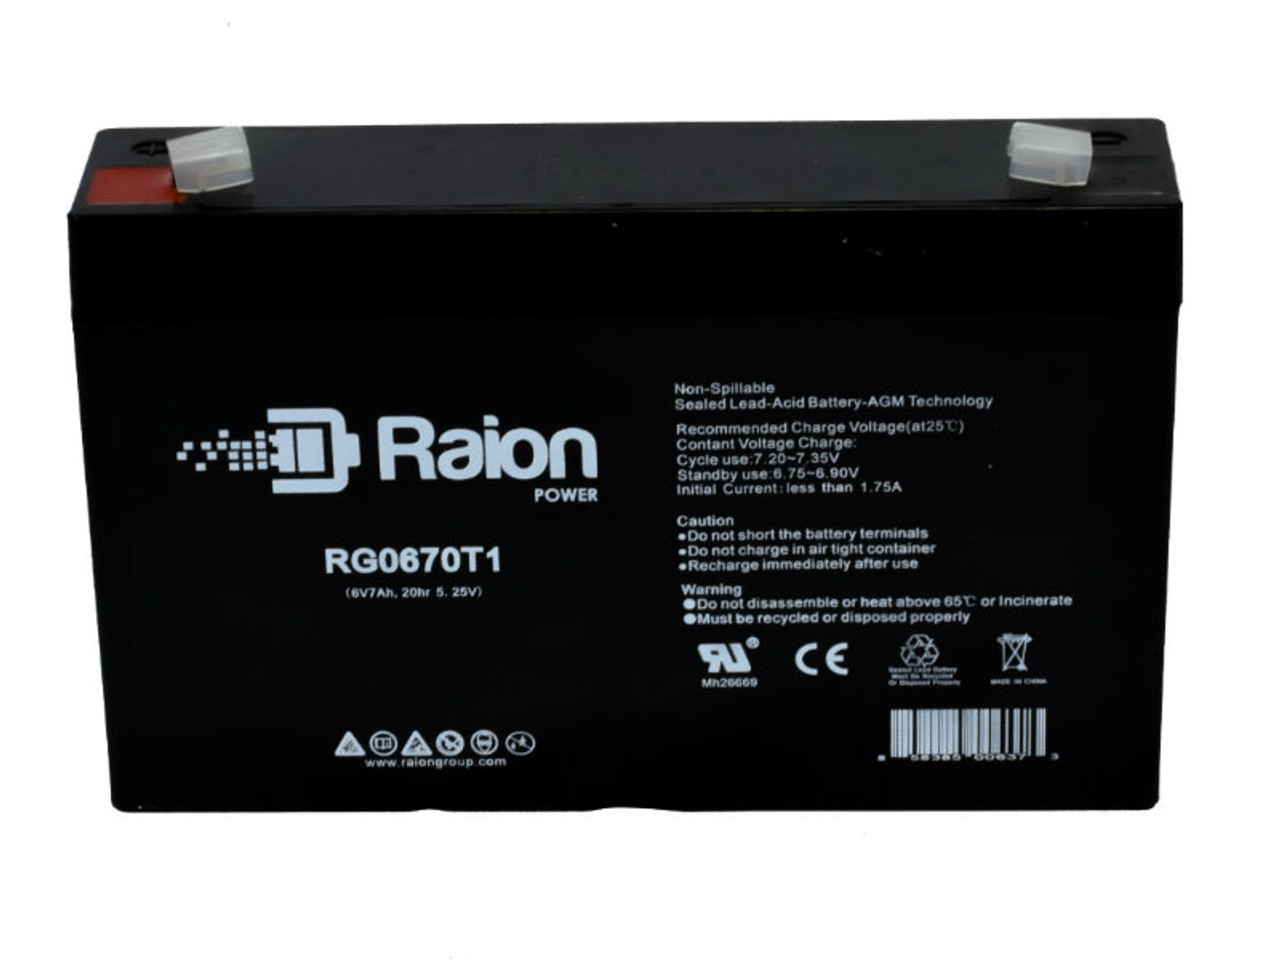 Raion Power RG0670T1 Replacement Battery Cartridge for Exide SRB-6V5